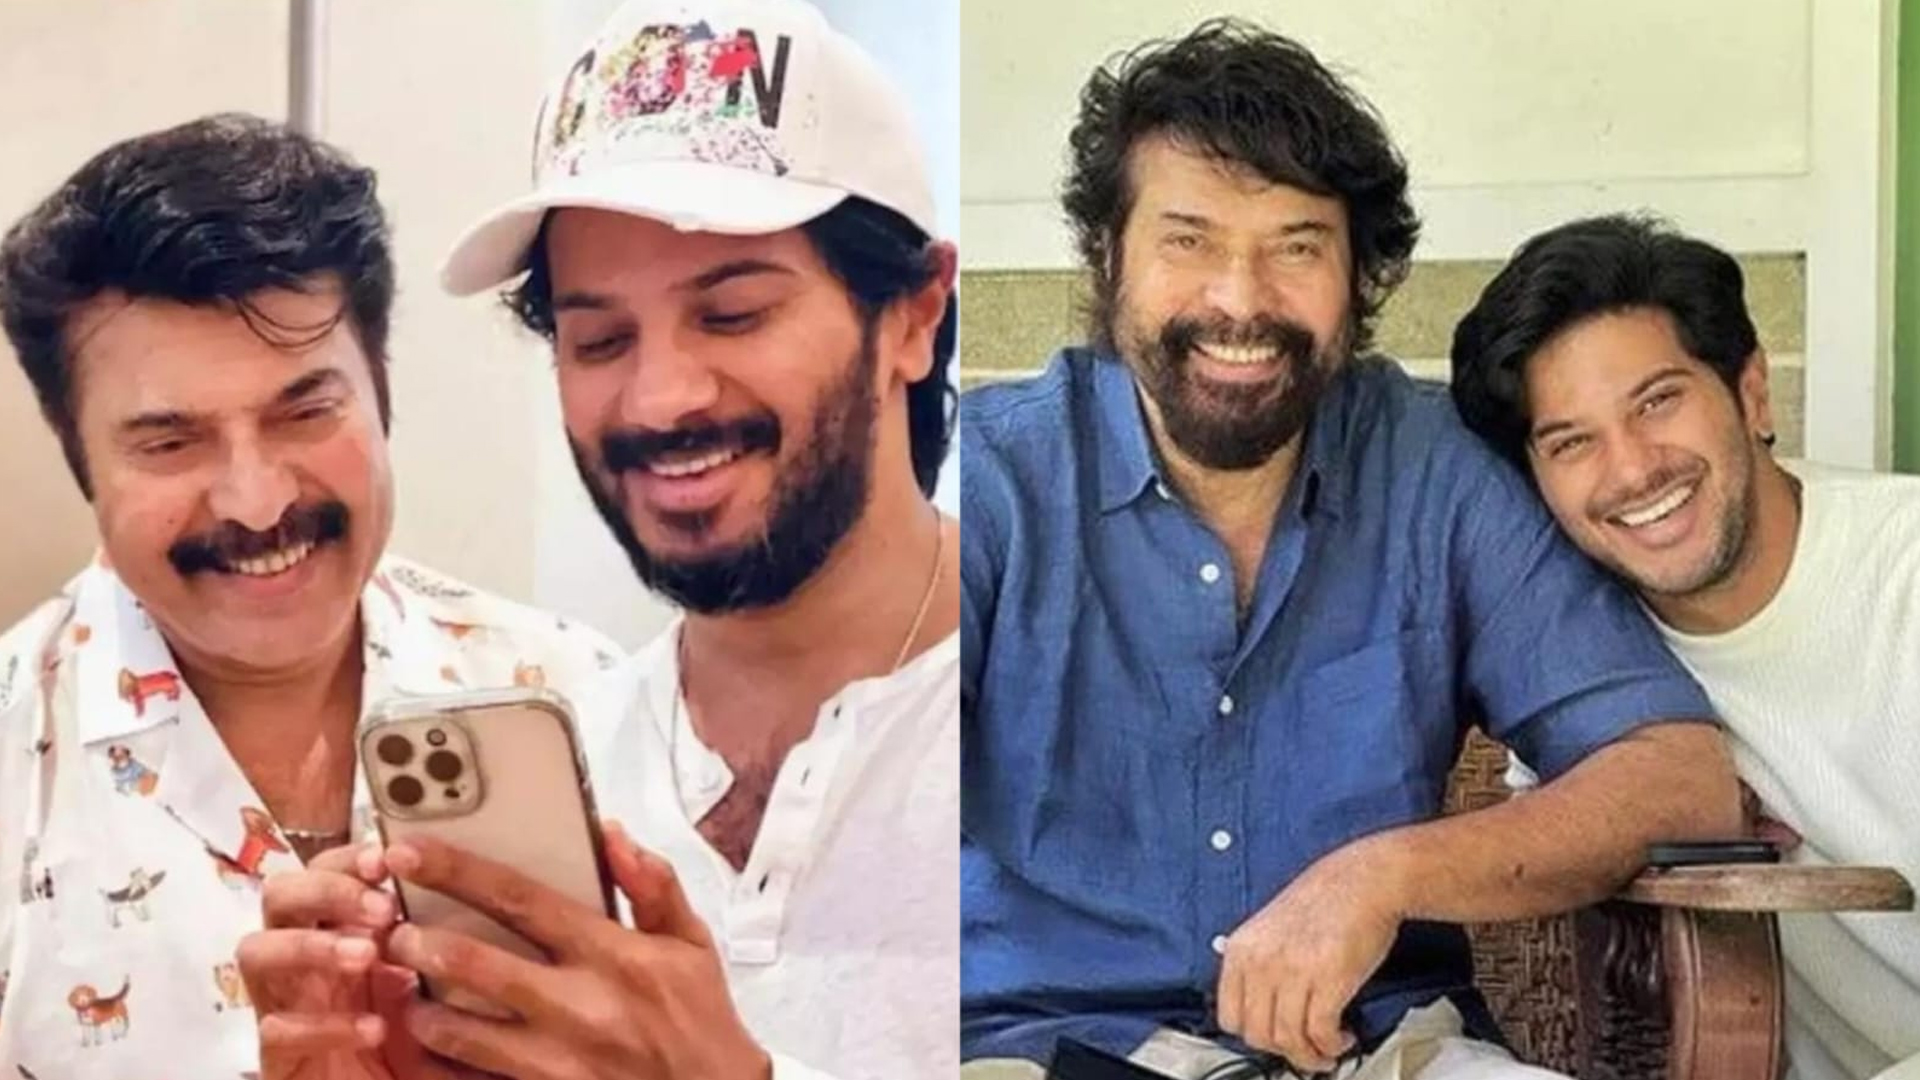 Dulquer Salmaan: “My father, Mammootty, is my greatest inspiration in the film industry, however, I’d not remake any of his films”